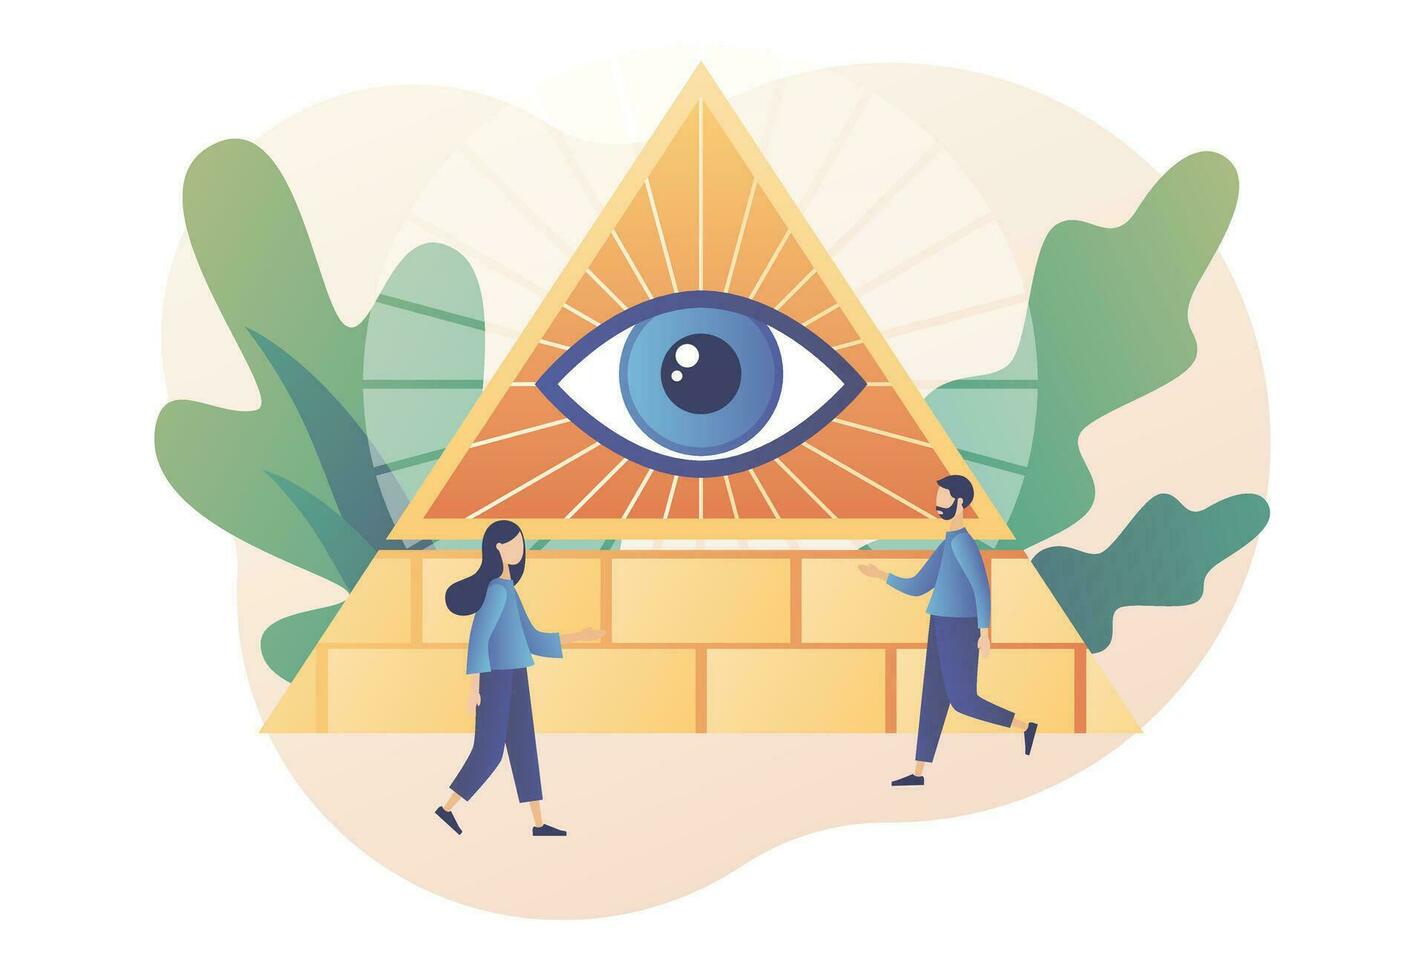 Conspiracy theory. Pyramid with all-seeing eye. Symbol of world government. Modern flat cartoon style. Vector illustration on white background